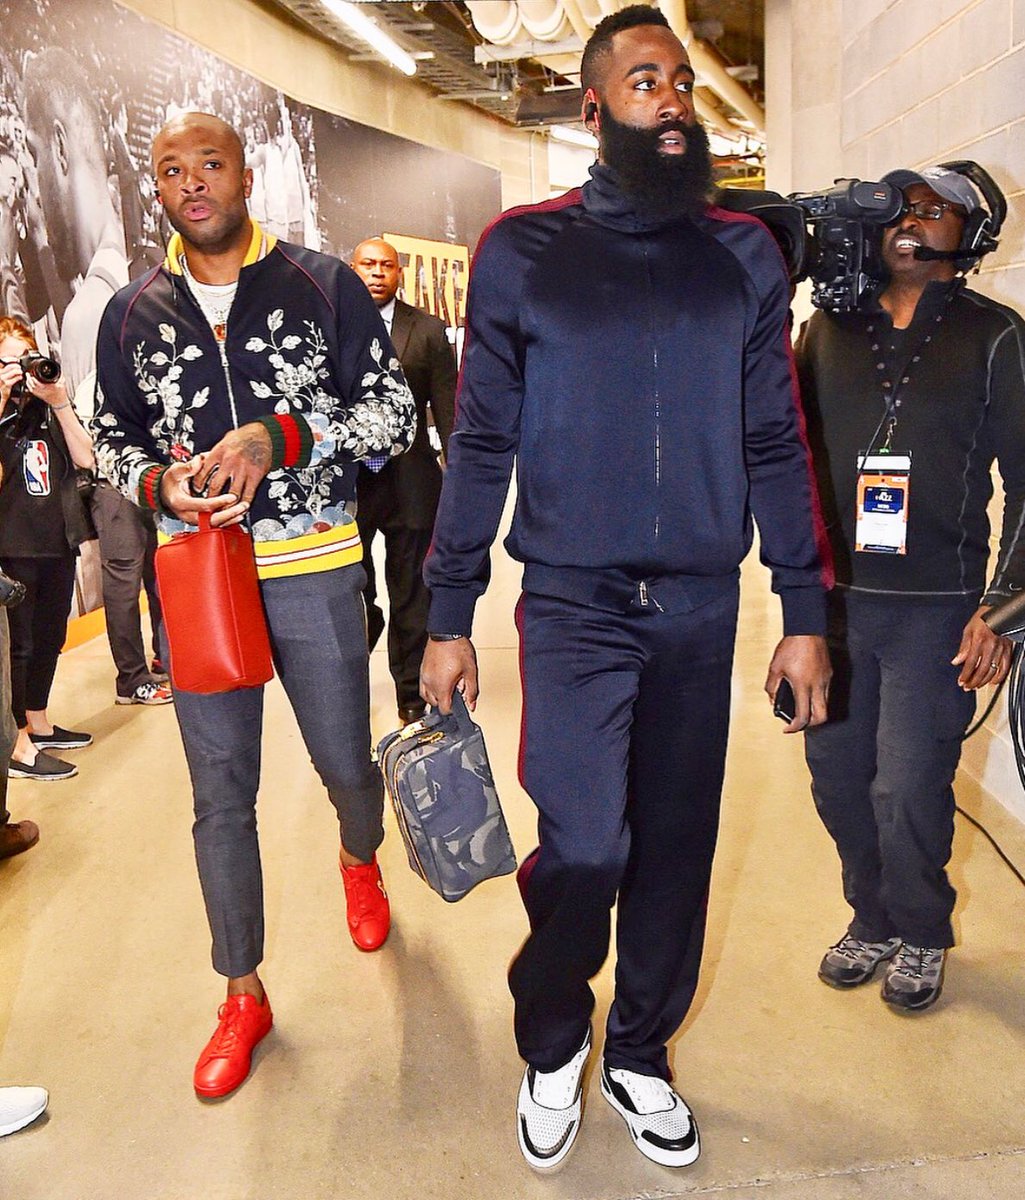 Darren Rovell on X: Didn't see that whole “showing up to the game carrying  a high end toiletry bag” trend coming. The Tom Ford one that Harden brought  today retails for $1,850.